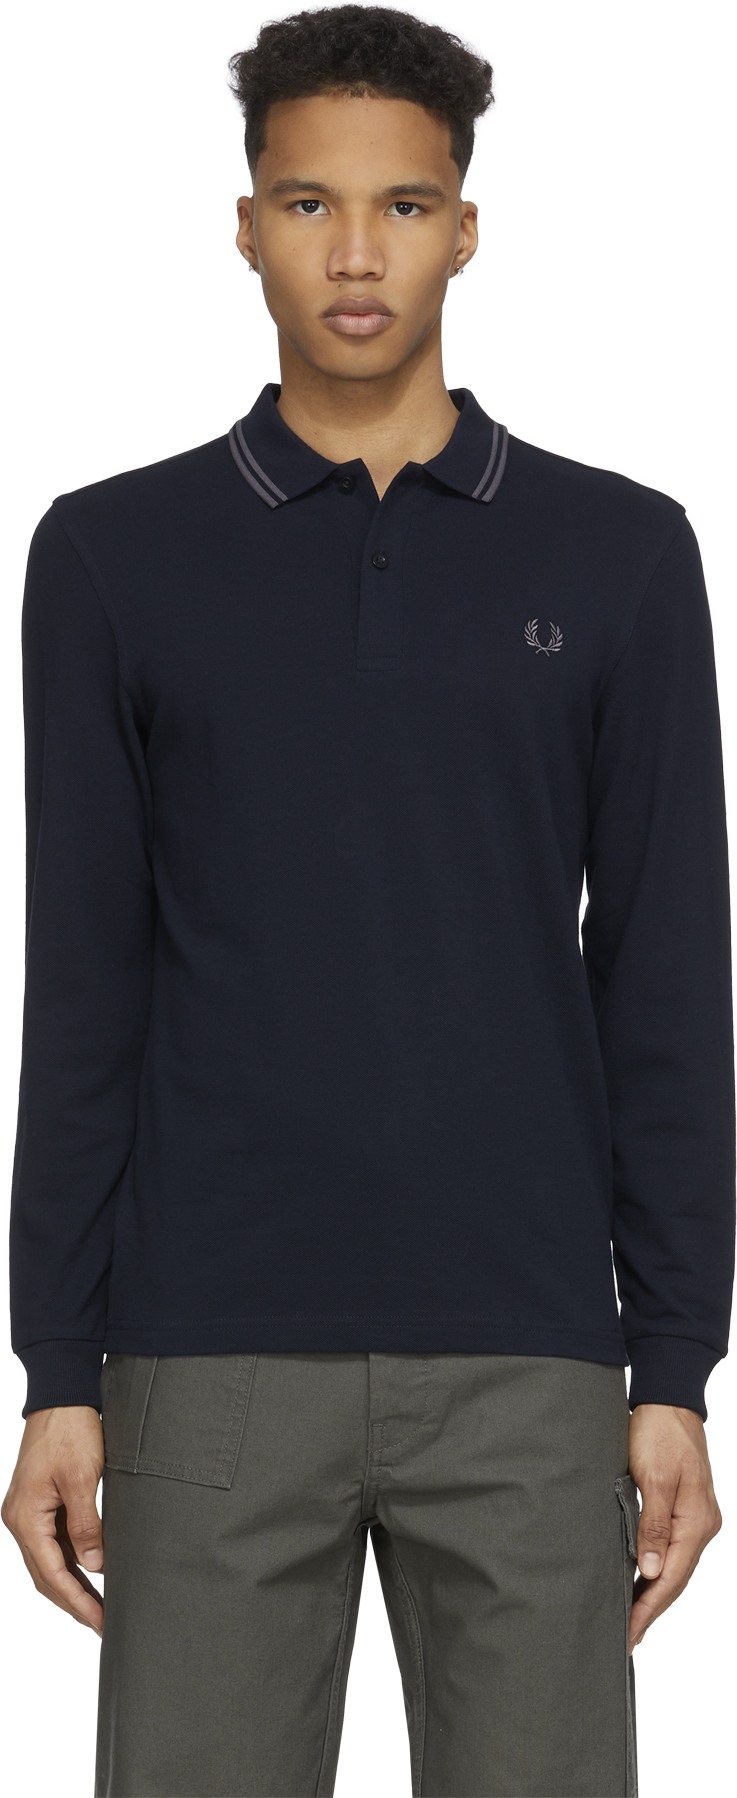 Fred Perry: M3636 Twin Tipped Long Sleeve Polo Shirt | influenceu